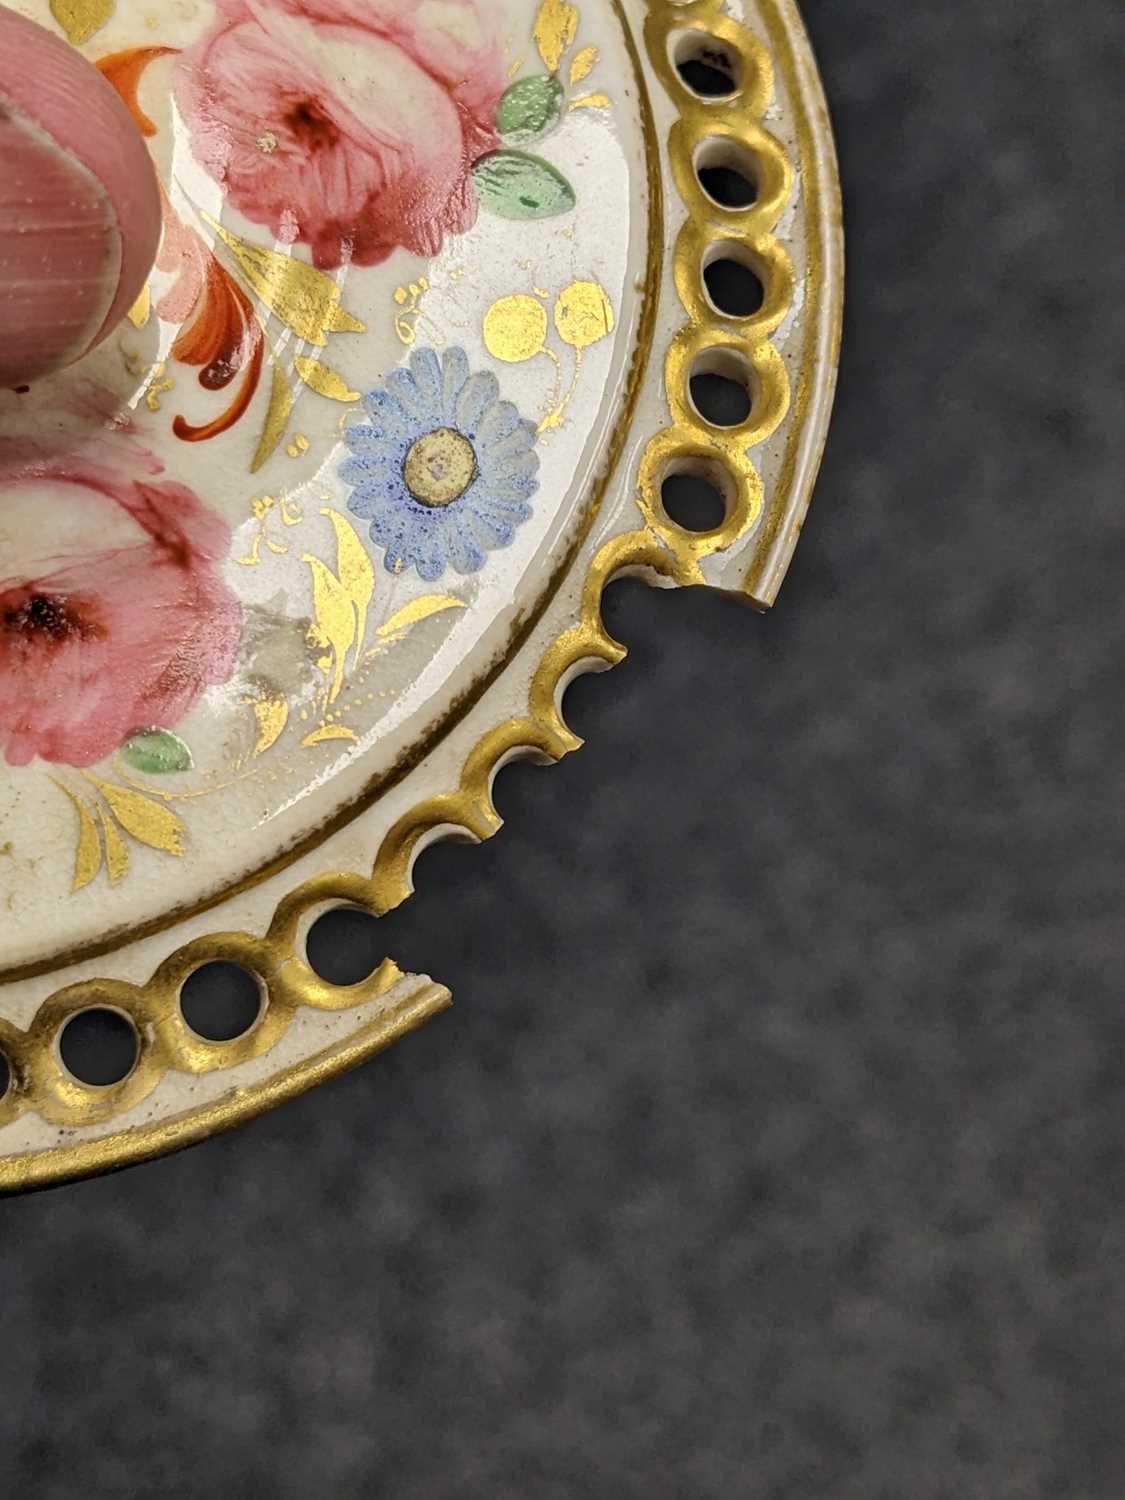 THREE CROWN DERBY PORCELAINS, c. 1782-1825, comprising dessert plate, centre painted with nigella - Image 11 of 12